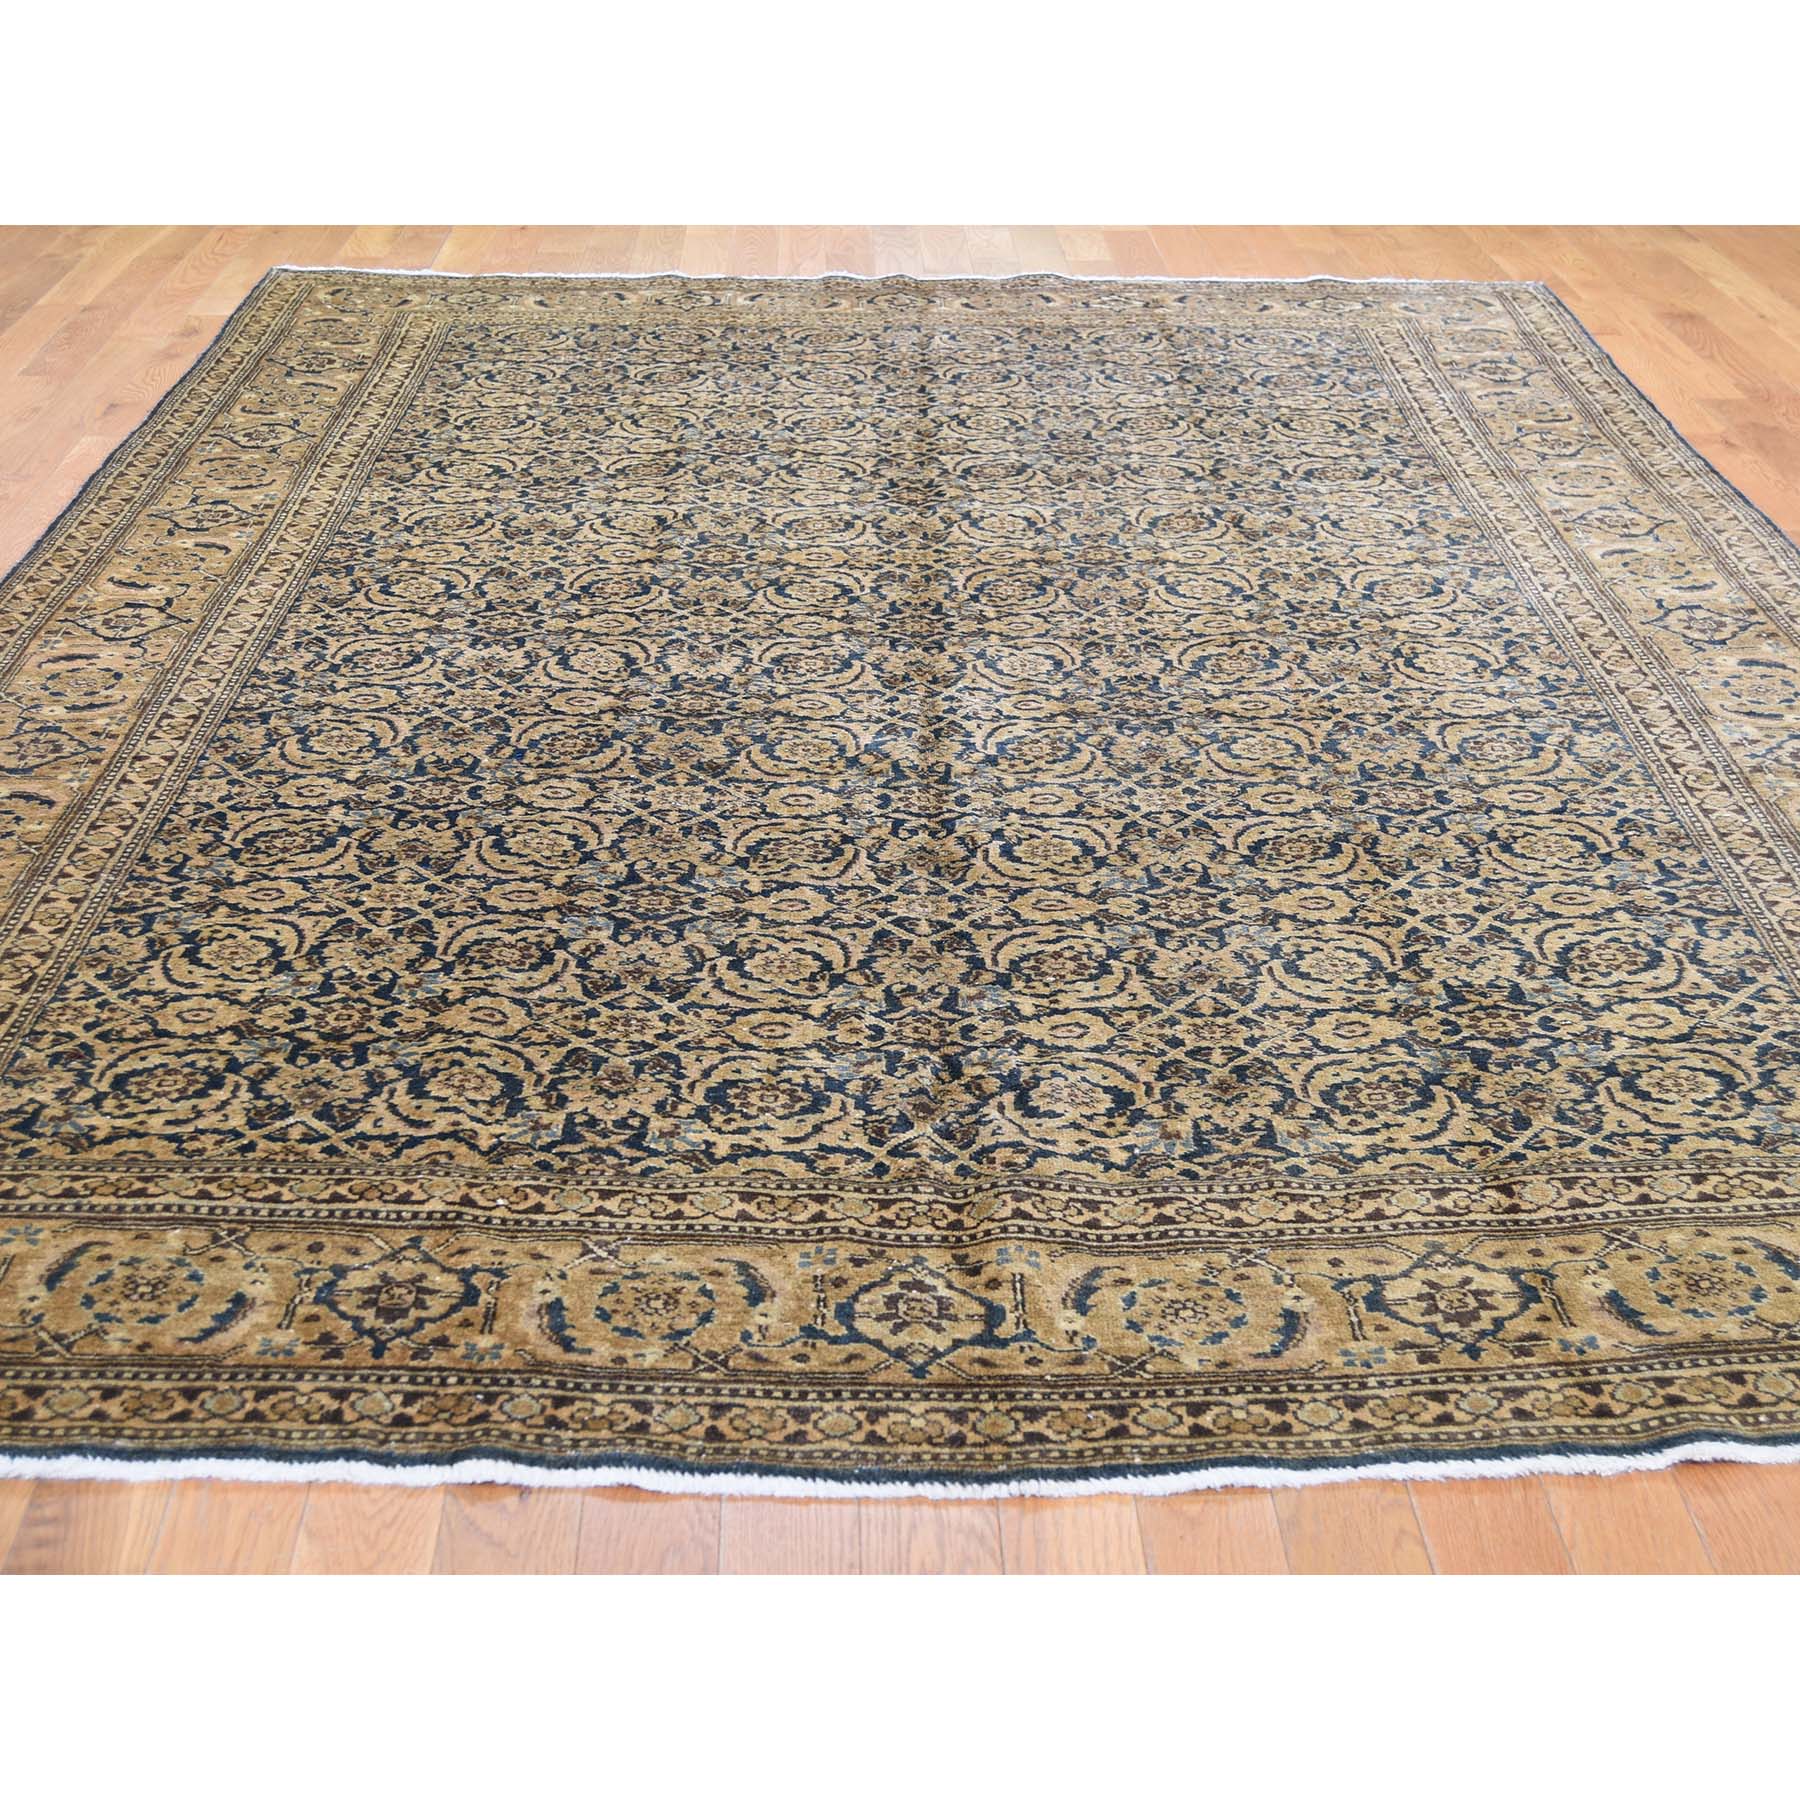 7-x10-6  Antique Persian Tabriz Full Pile Exc Condition Hand Knotted Oriental Rug 